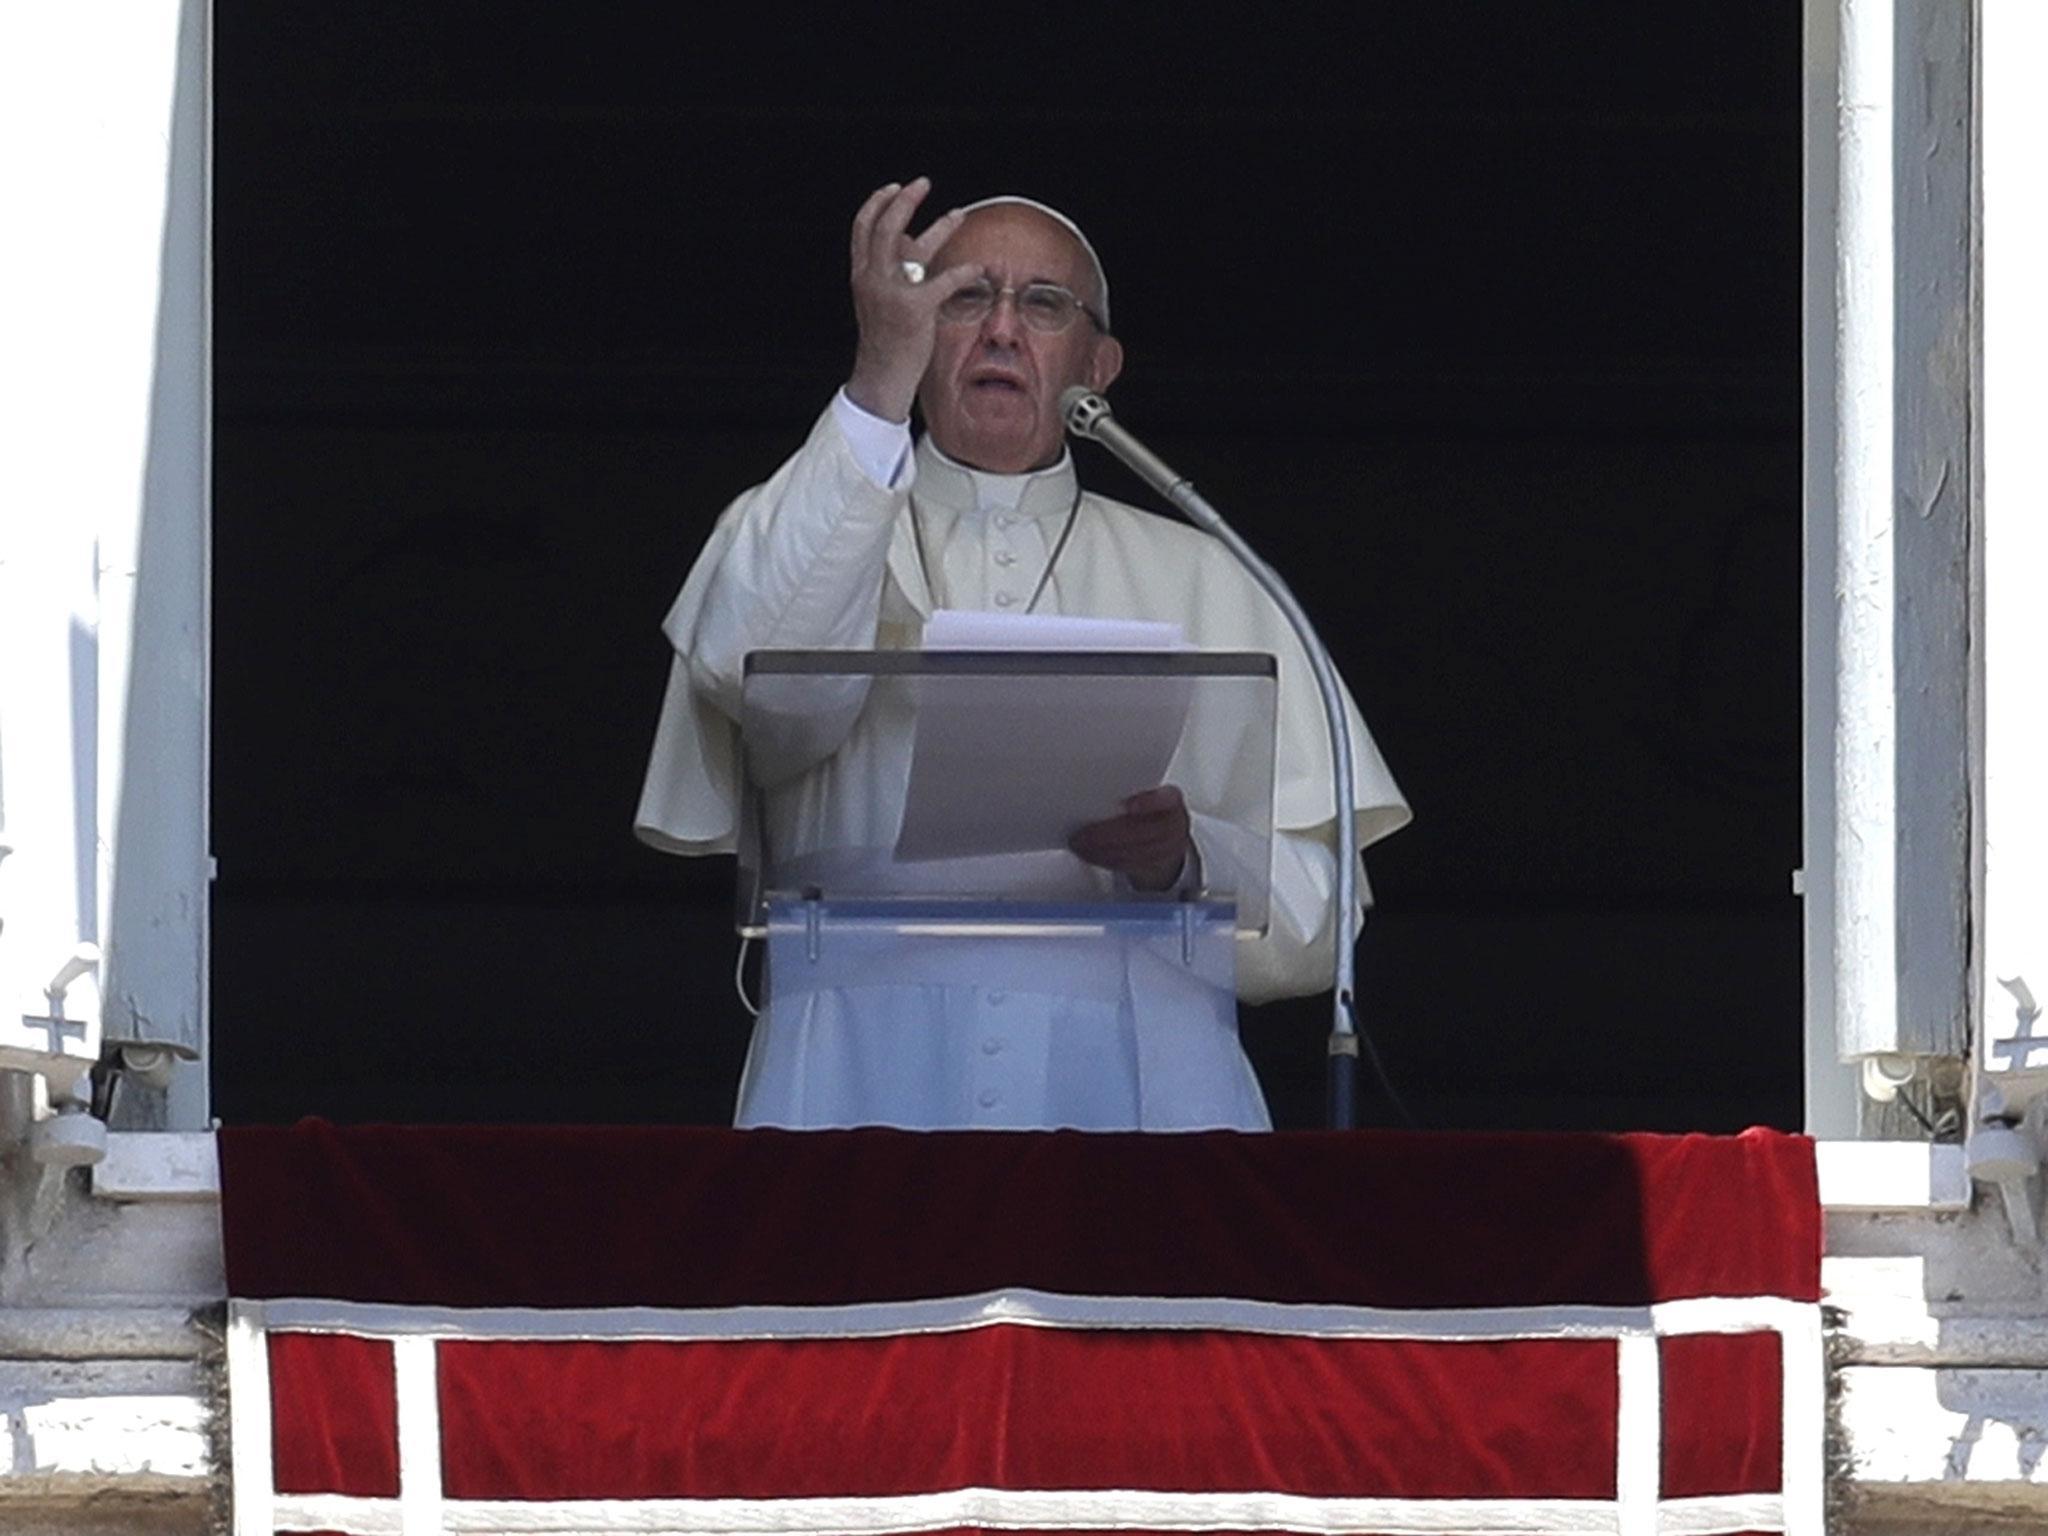 Pope Francis led thousands of people in prayer for the victims, who he said were killed in 'another act of ferocious violence'